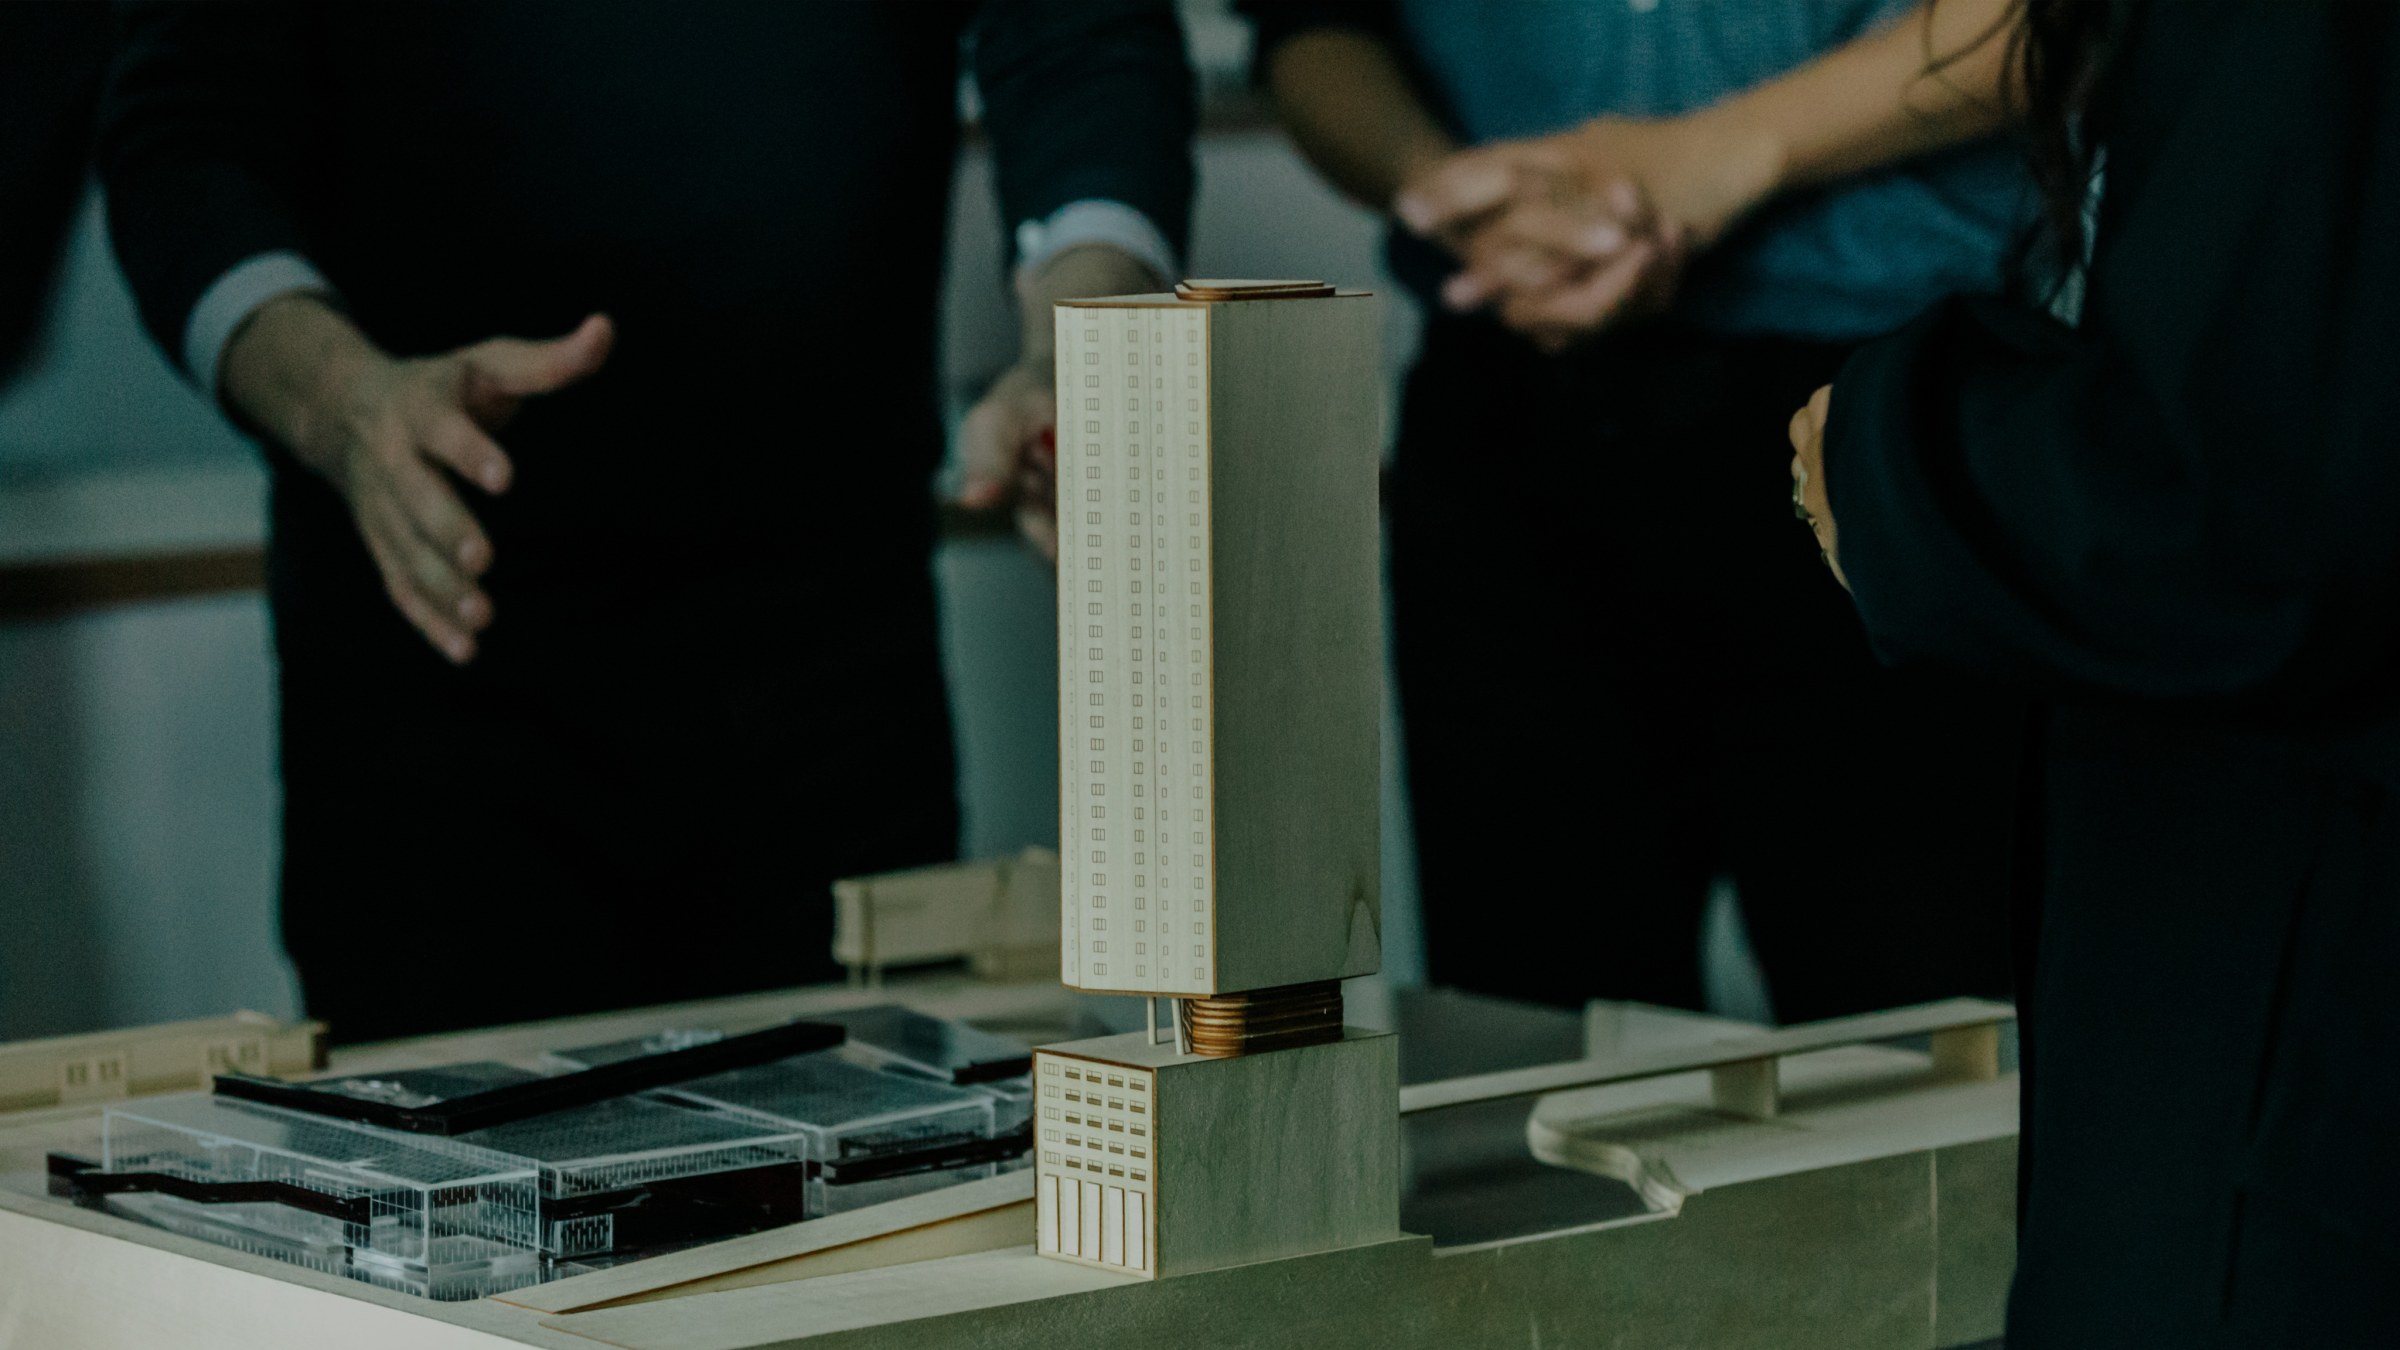 Close-up photo of a tall wooden tower and urban landscape model on a table with people standing behind it with only their torsos and hands in the frame.